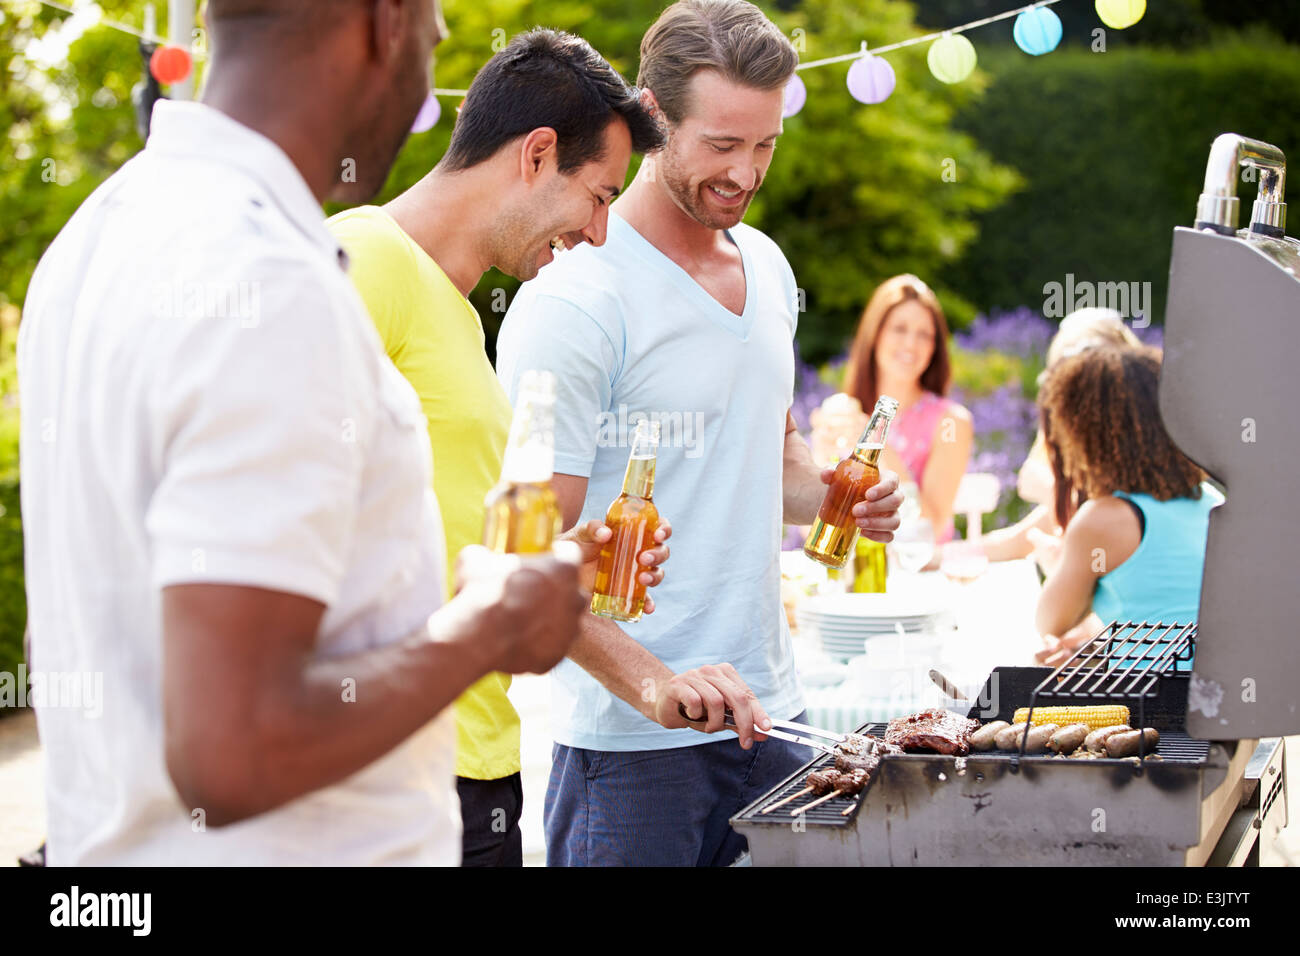 Group Of Men Cooking On Barbeque At Home Stock Photo